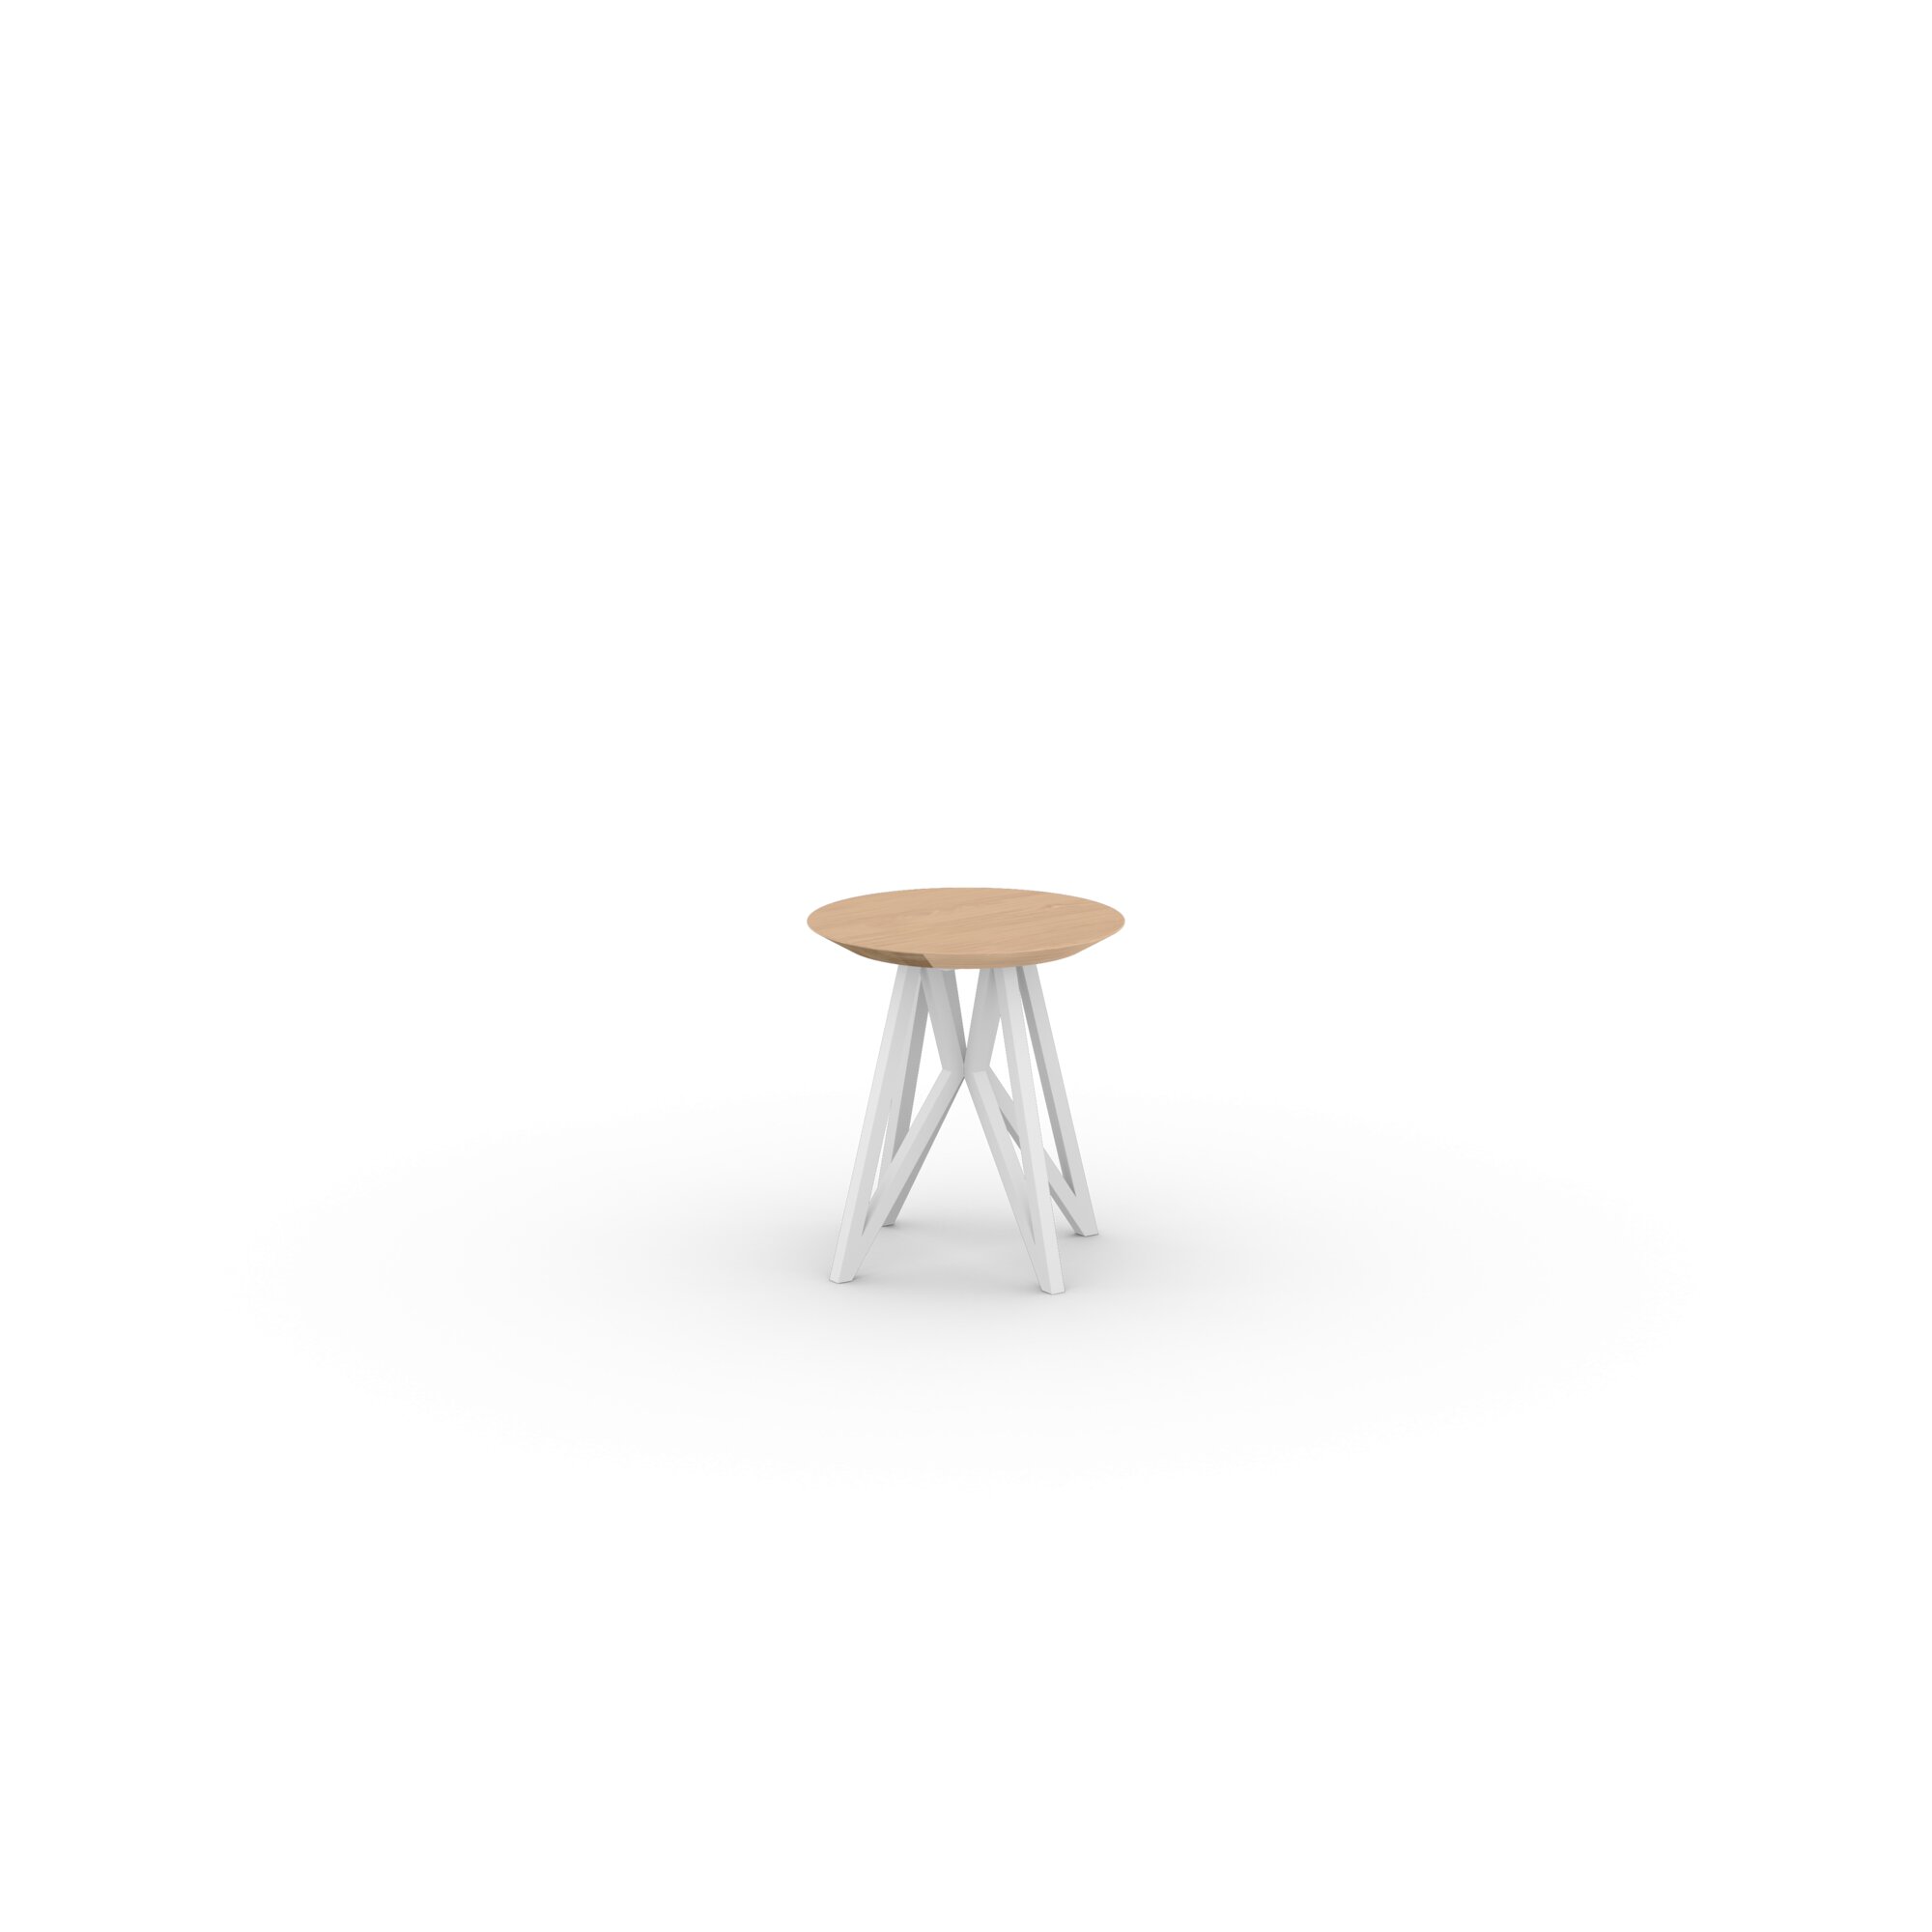 Design Coffee Table | Butterfly Quadpod Coffee Table White | Oak hardwax oil natural light 3041 | Studio HENK| 